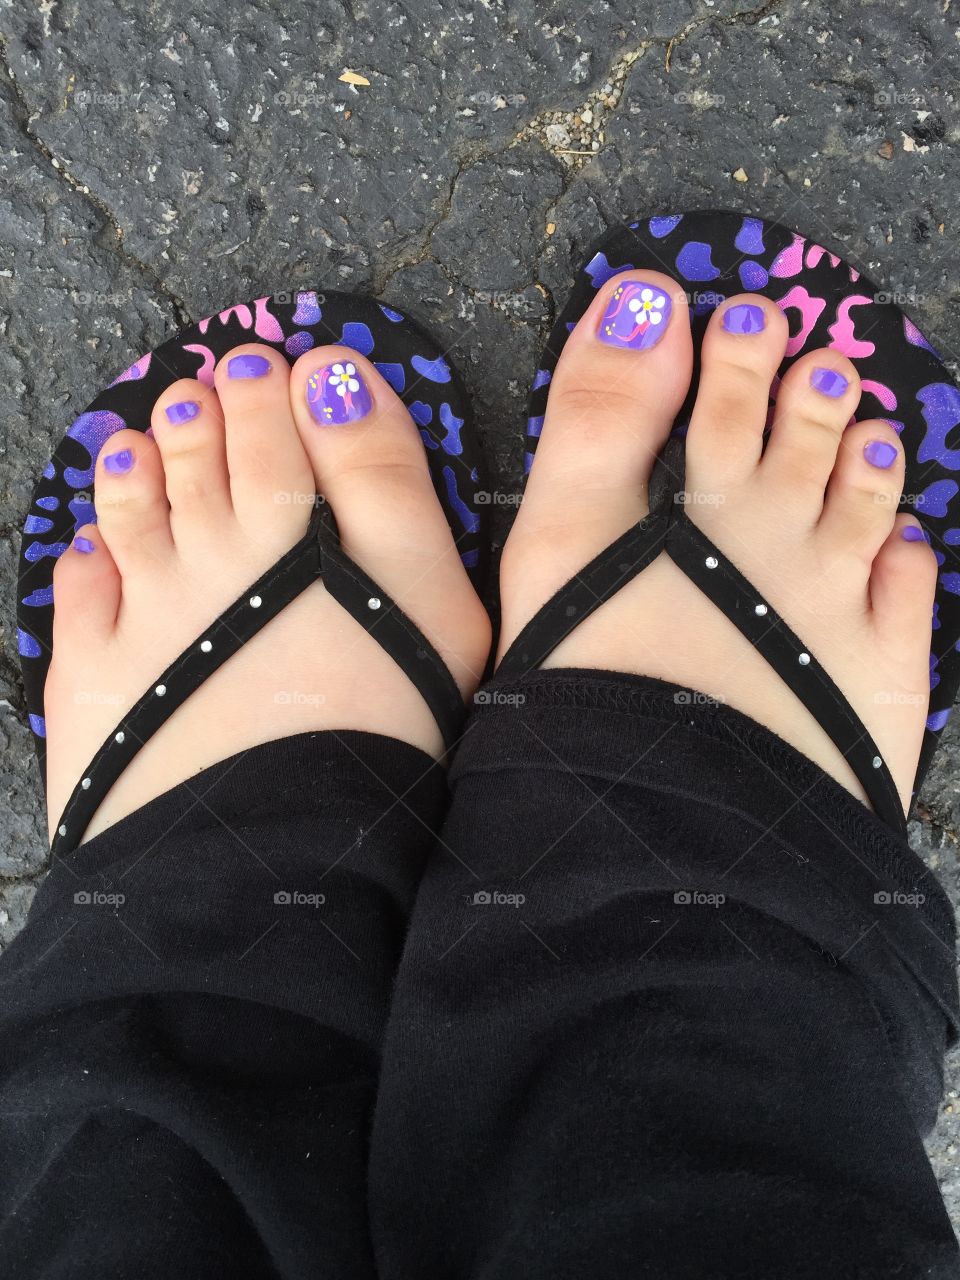 My toes painted a light purple with white flowers on them 